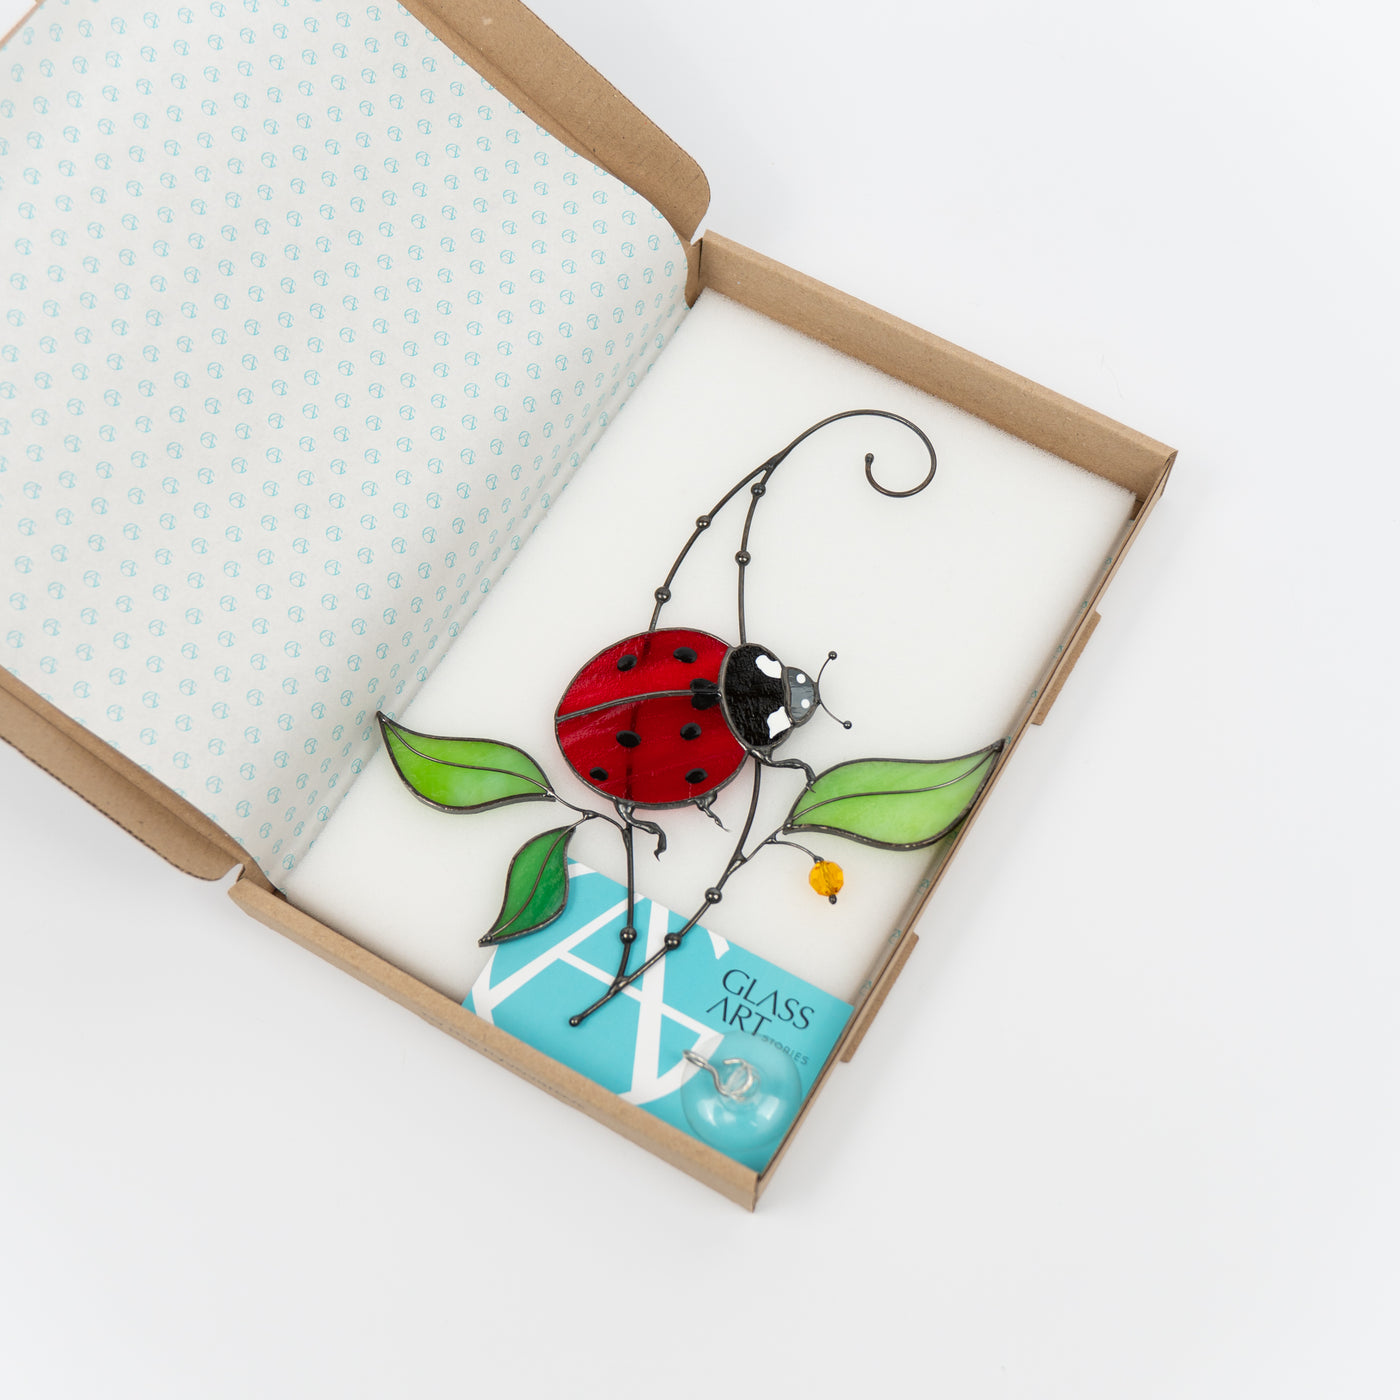 Ladybug stained glass suncatcher in a brand box